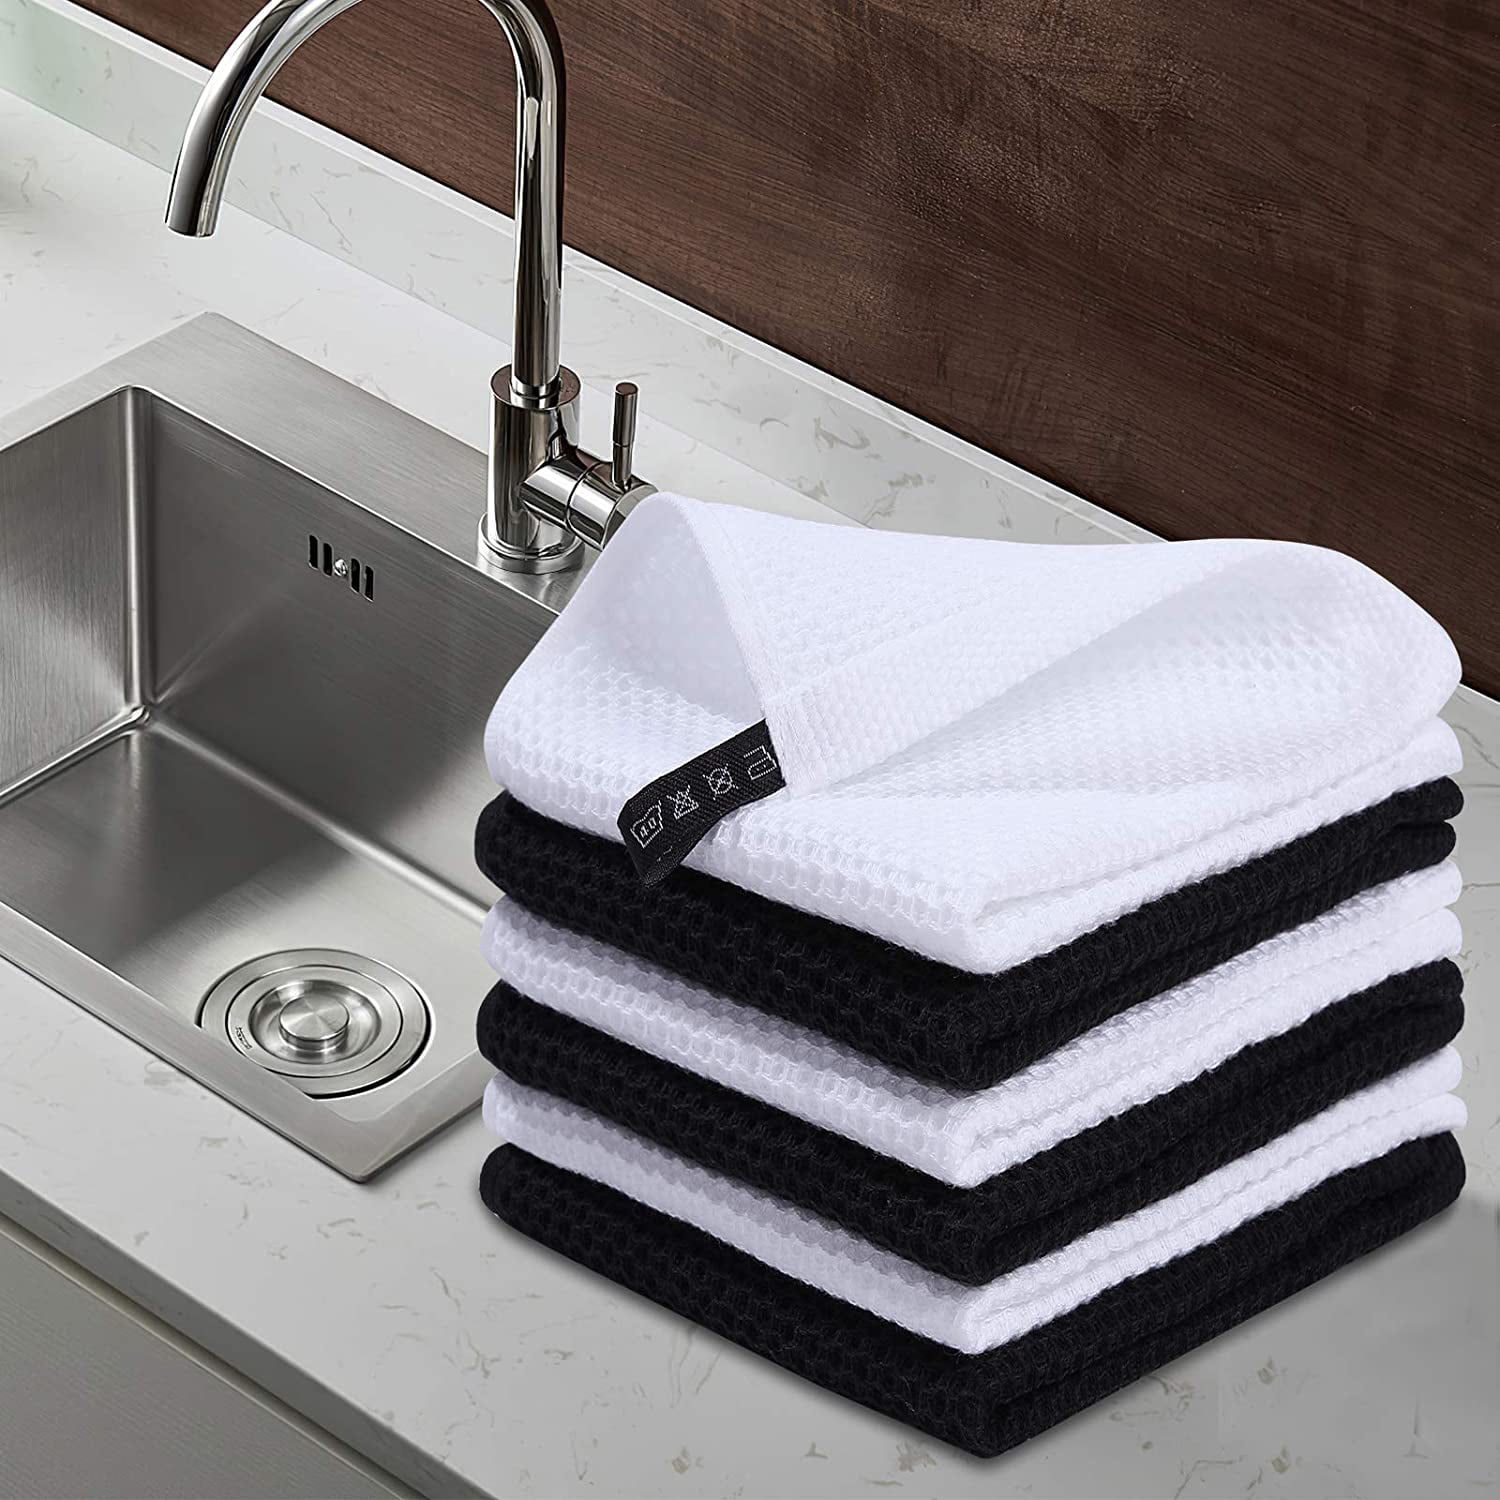 6 Pack Kitchen Towels And Dishcloths Sets100% Cotton Soft